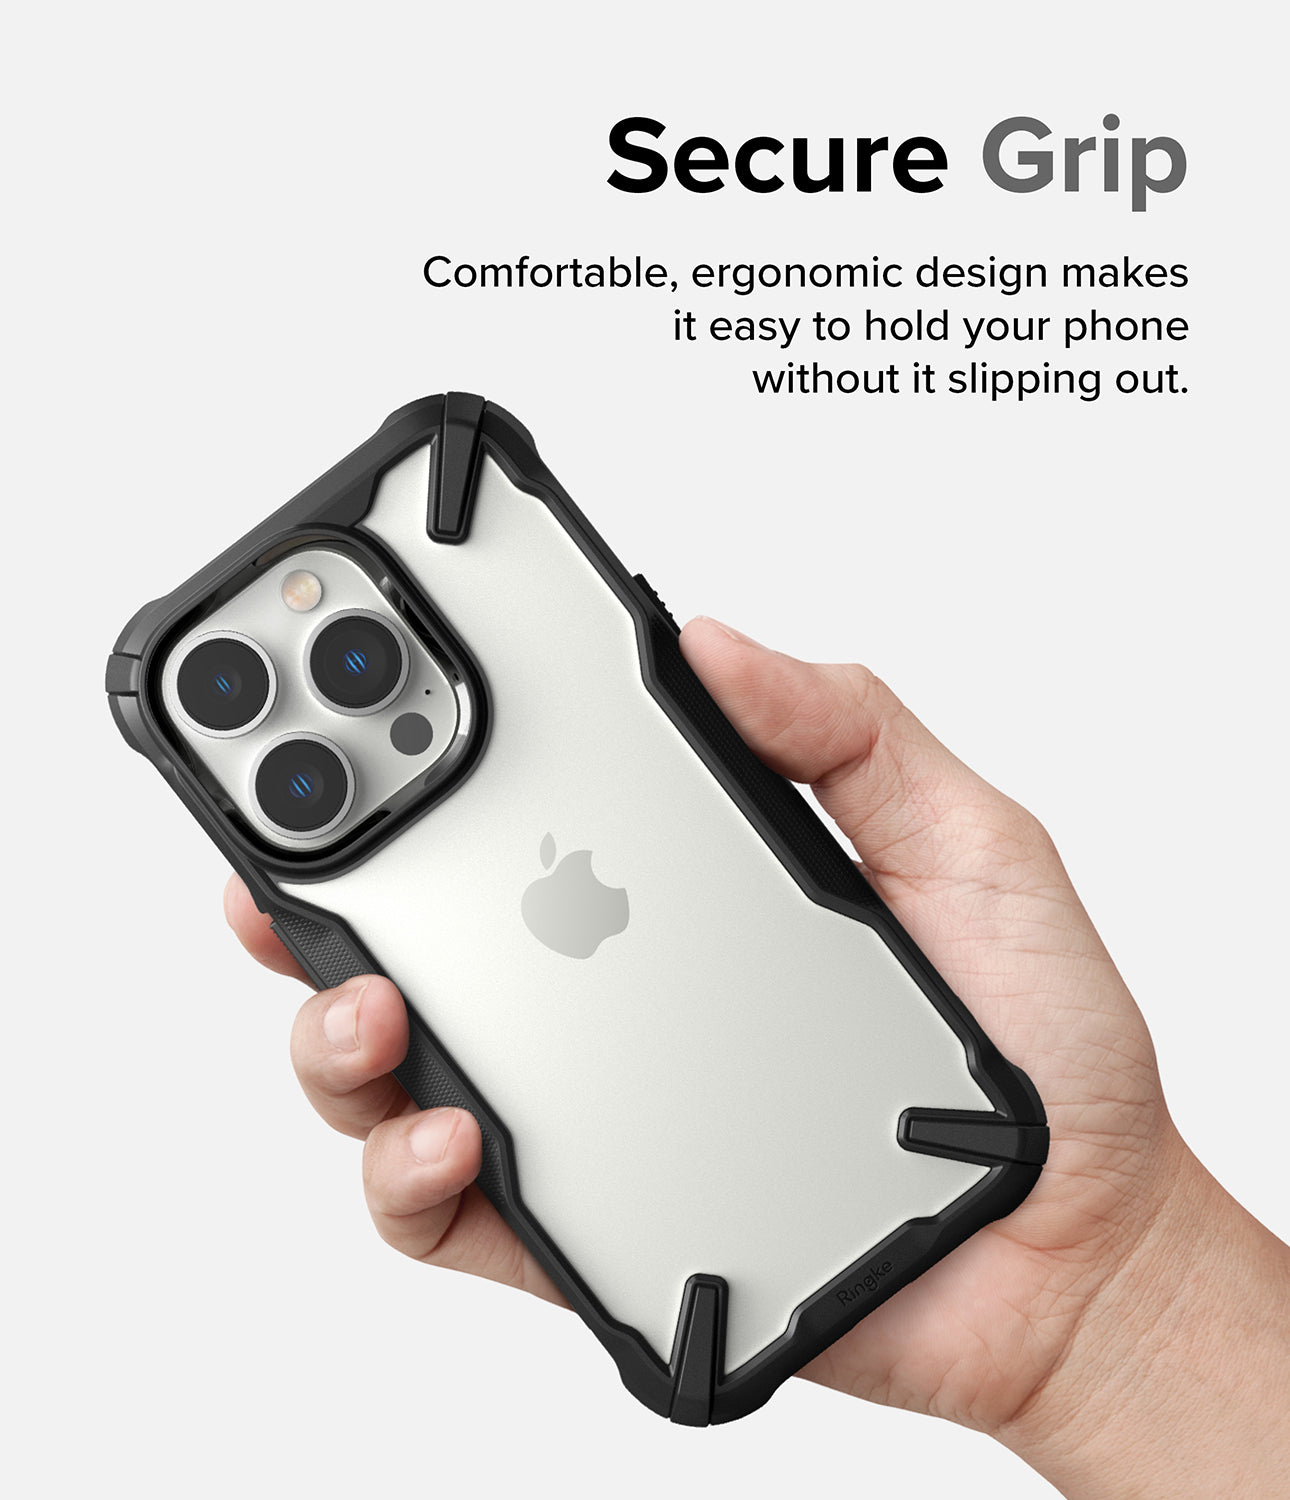 iPhone 14 Pro Max Case | Fusion-X - Black - Secure Grip. Comfortable, ergonomic design makes it easy to hold your phone without it slipping out.